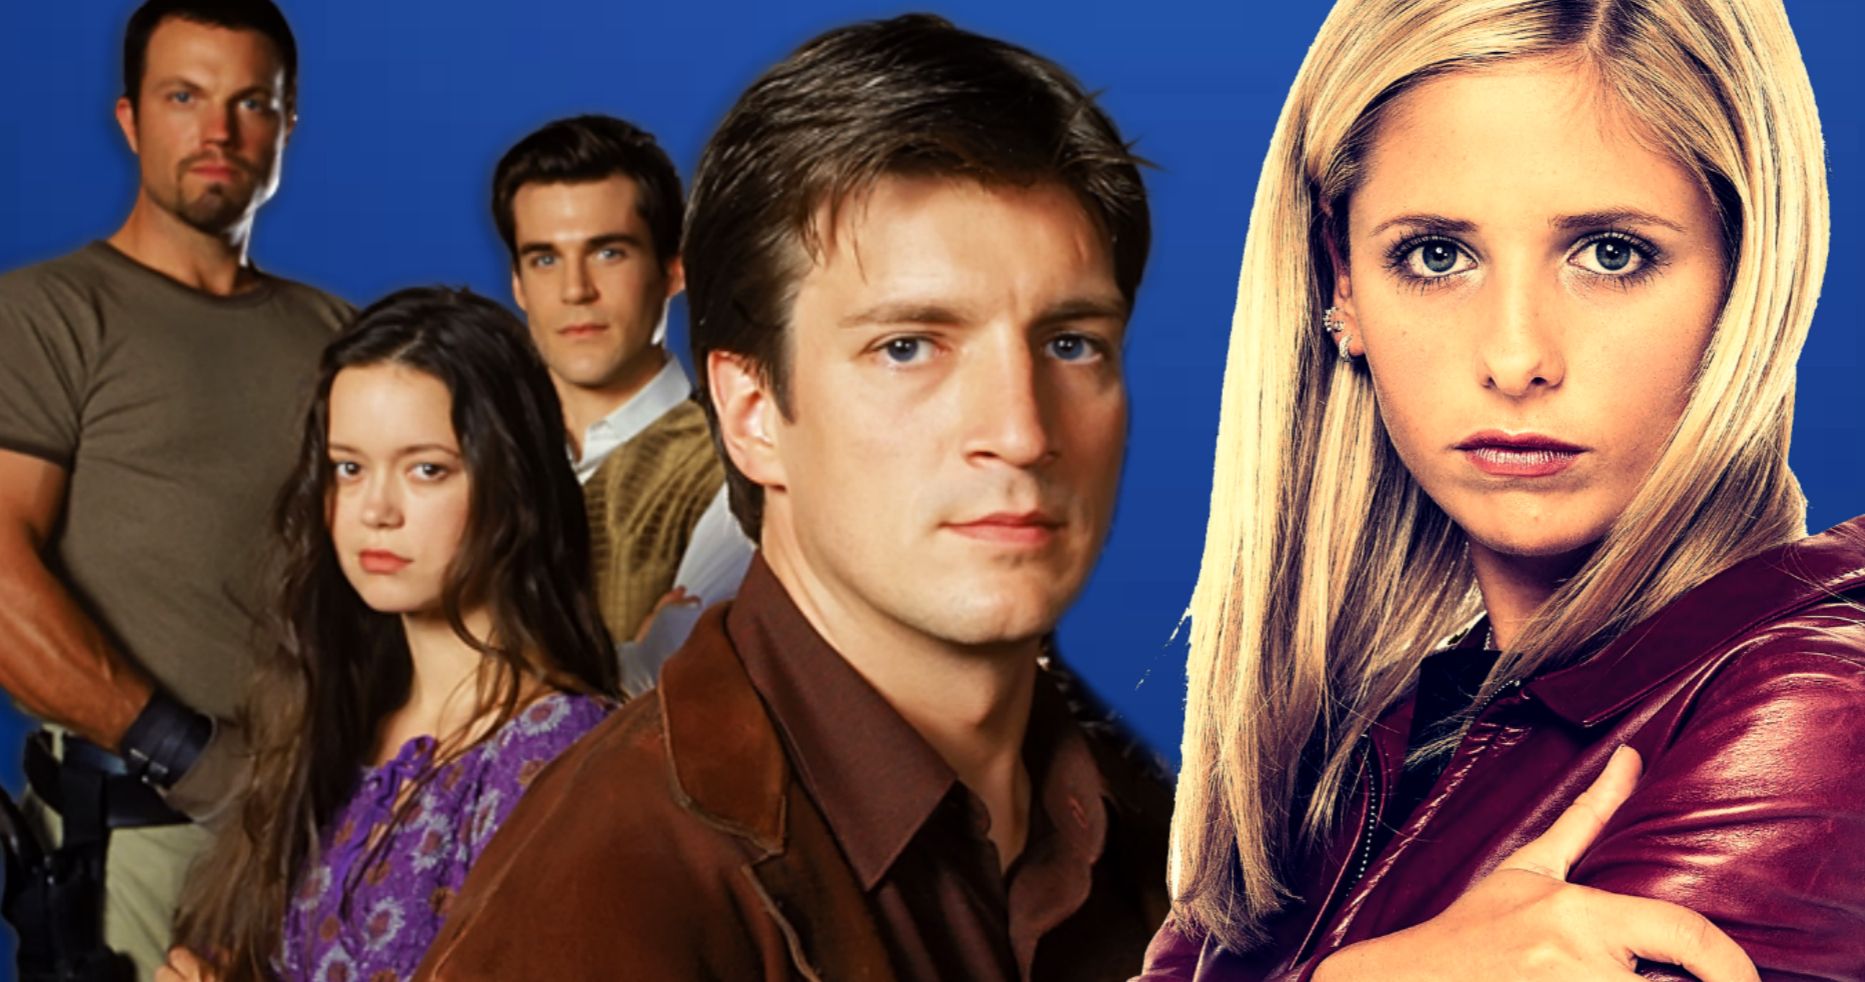 Disney+ Asks Users If They Want Buffy, Firefly and Other Mature Content